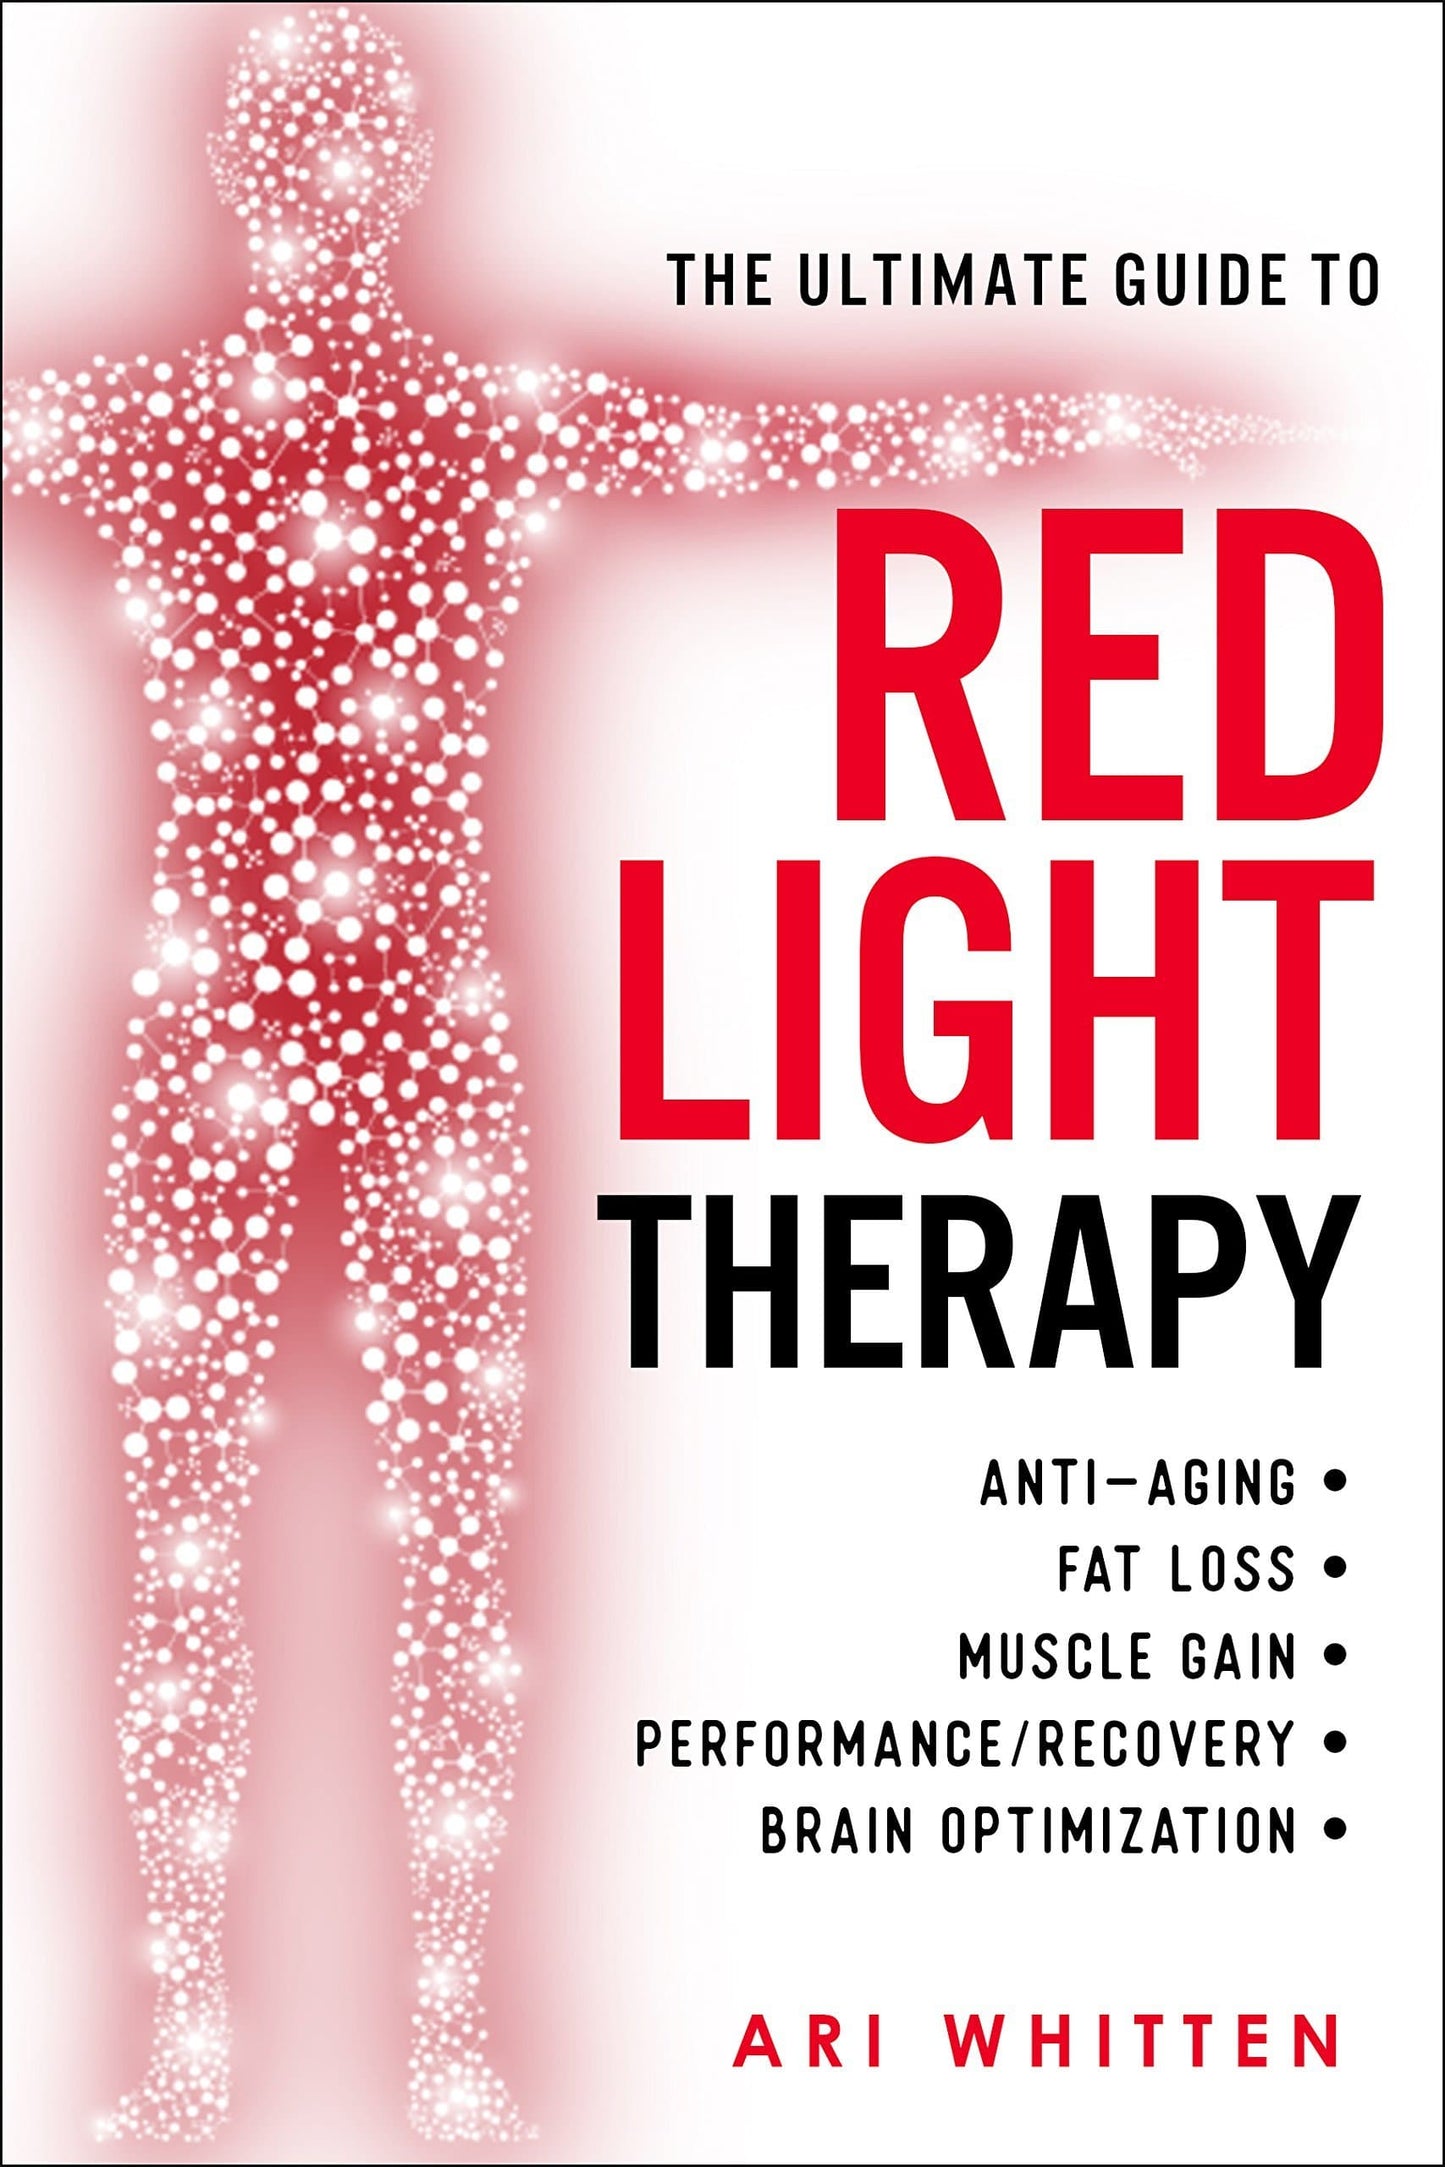 The Ultimate Guide To Red Light Therapy: How to Use Red and Near-Infrared Light Therapy for Anti-Aging, Fat Loss, Muscle Gain, Performance, and Brain Optimization